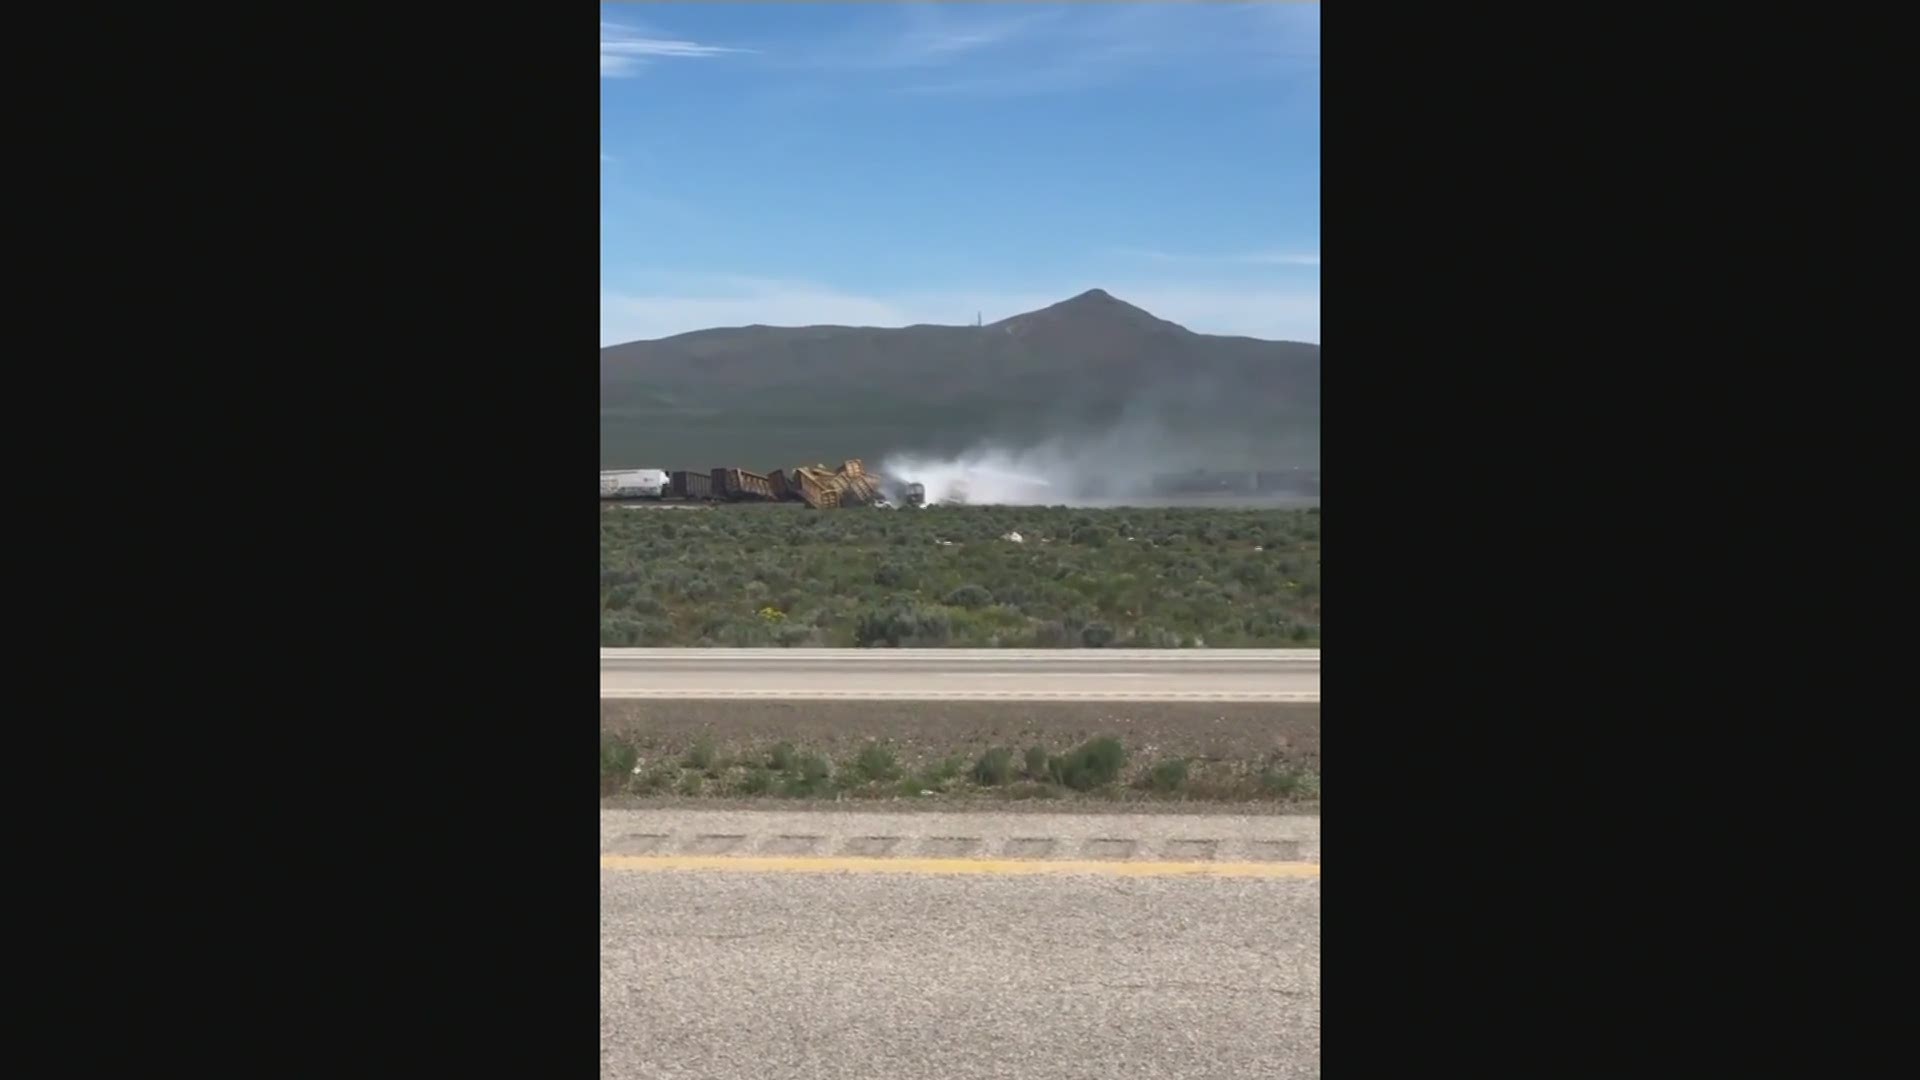 A 60-mile stretch (96 kilometers) of U.S. Interstate 80 in northeast Nevada was closed for a time while emergency crews responded to a train derailment.